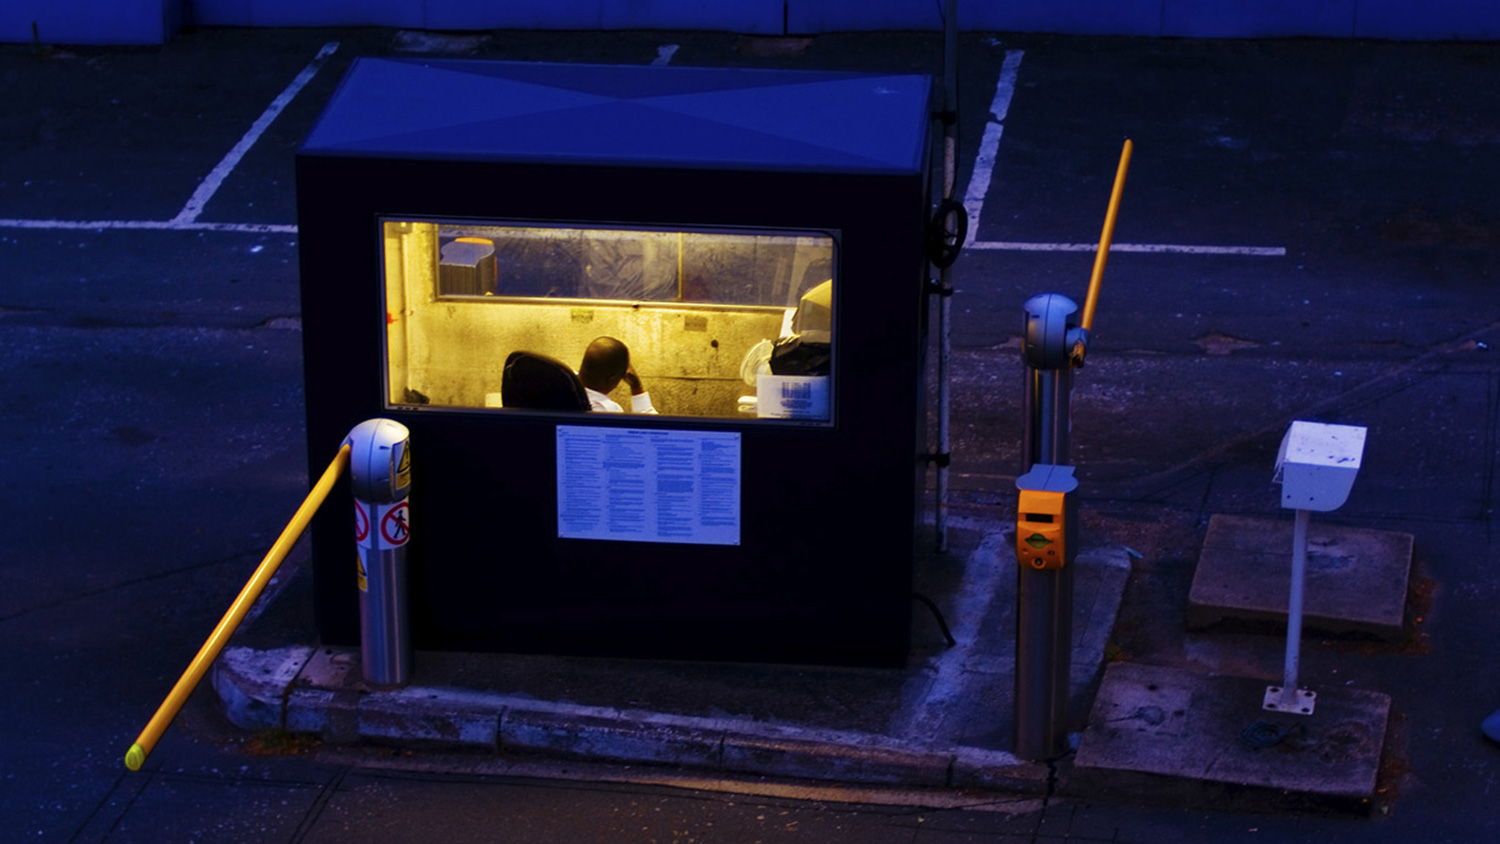 A night worker sits in a booth